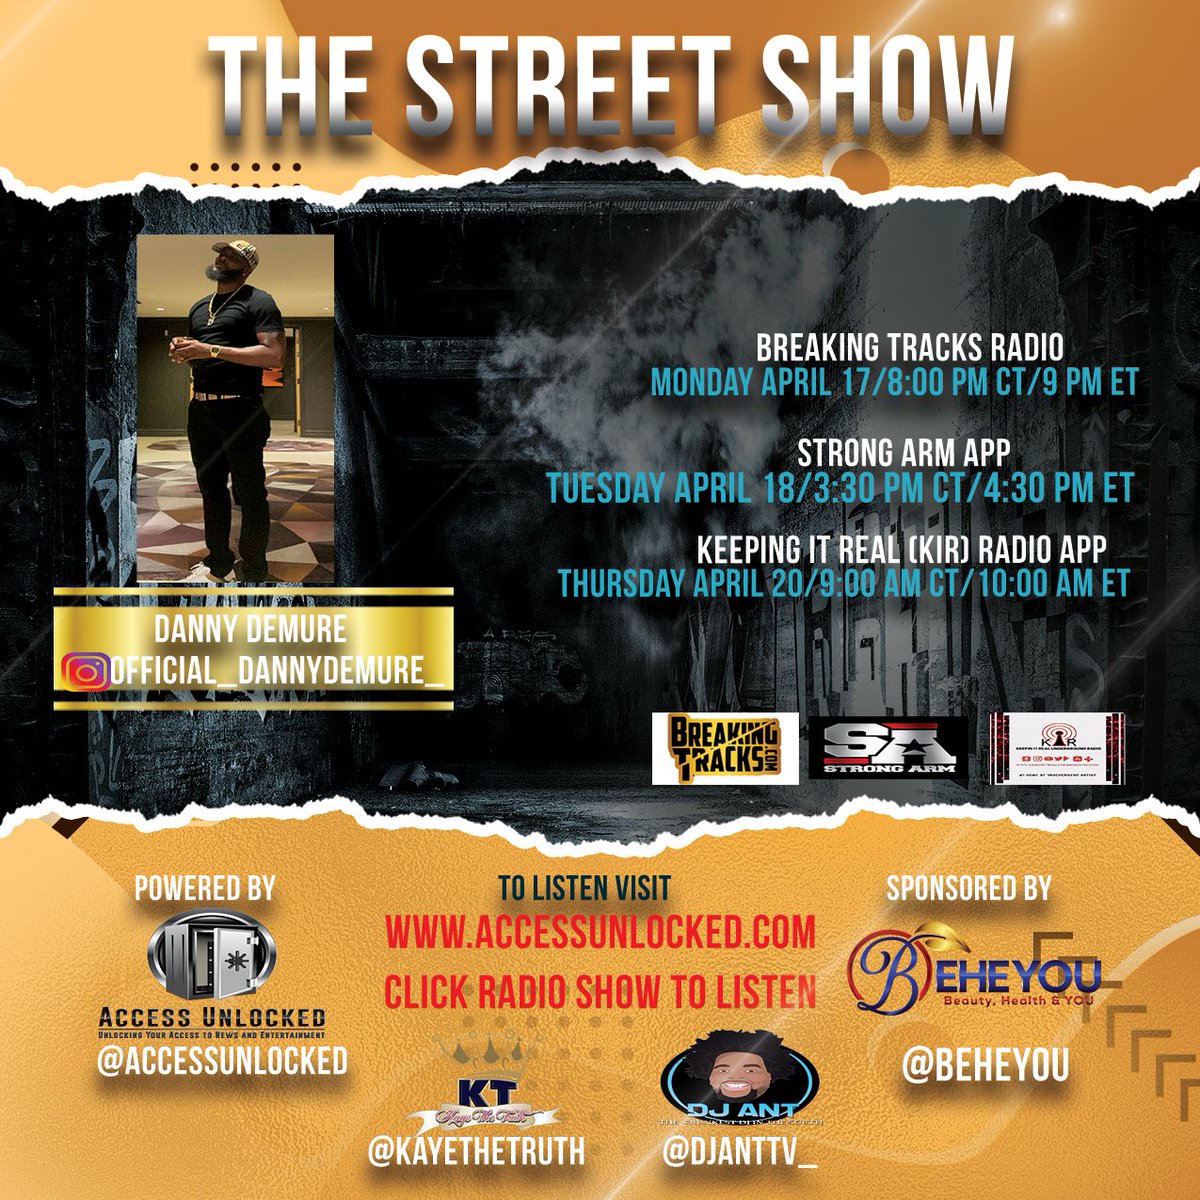 This week Danny #kayethetruth #djant #TheStreetShow #accessunlocked